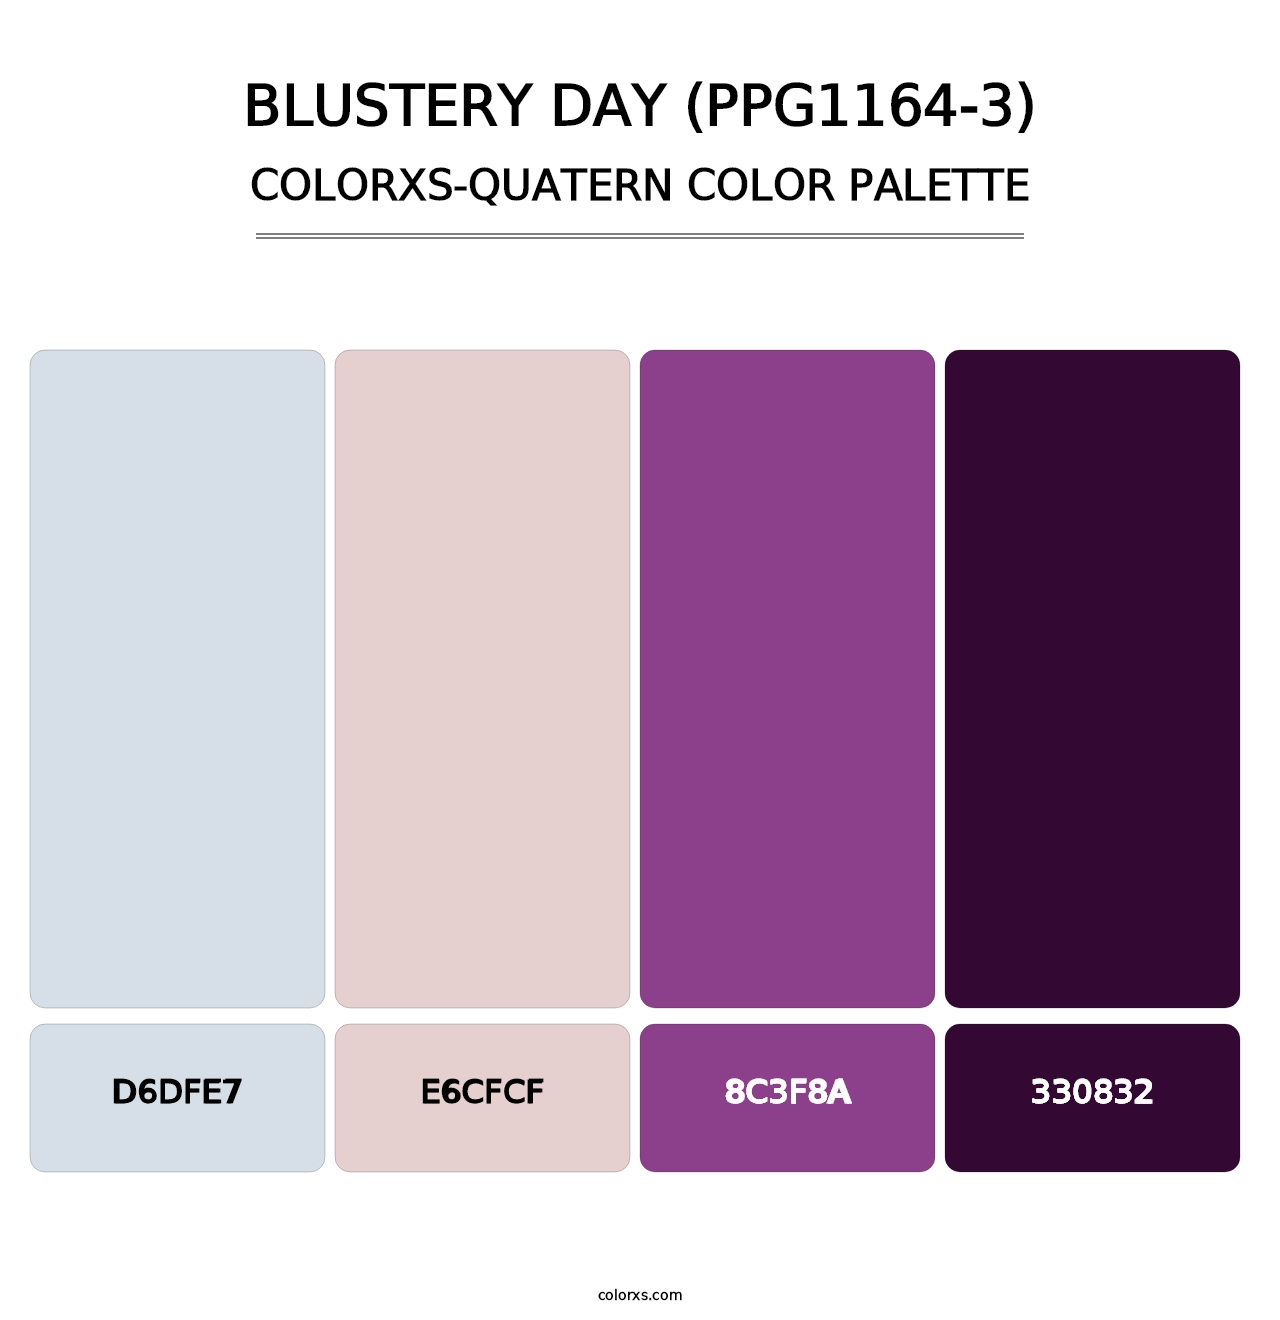 Blustery Day (PPG1164-3) - Colorxs Quatern Palette